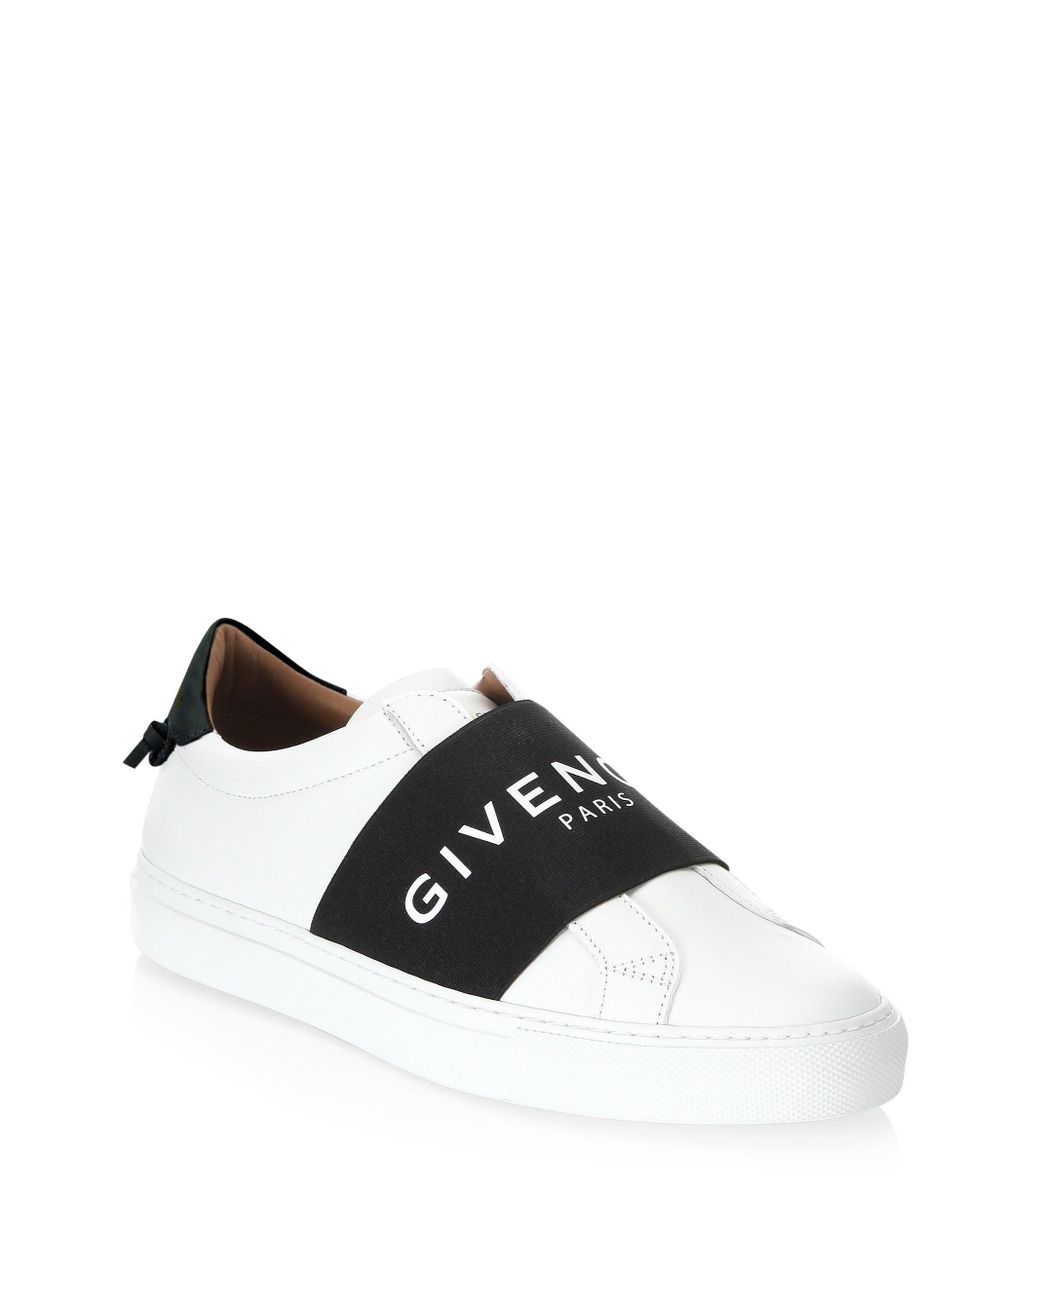 Lyst - Givenchy Urban Street Leather Sneakers in Black - Save 9. ...